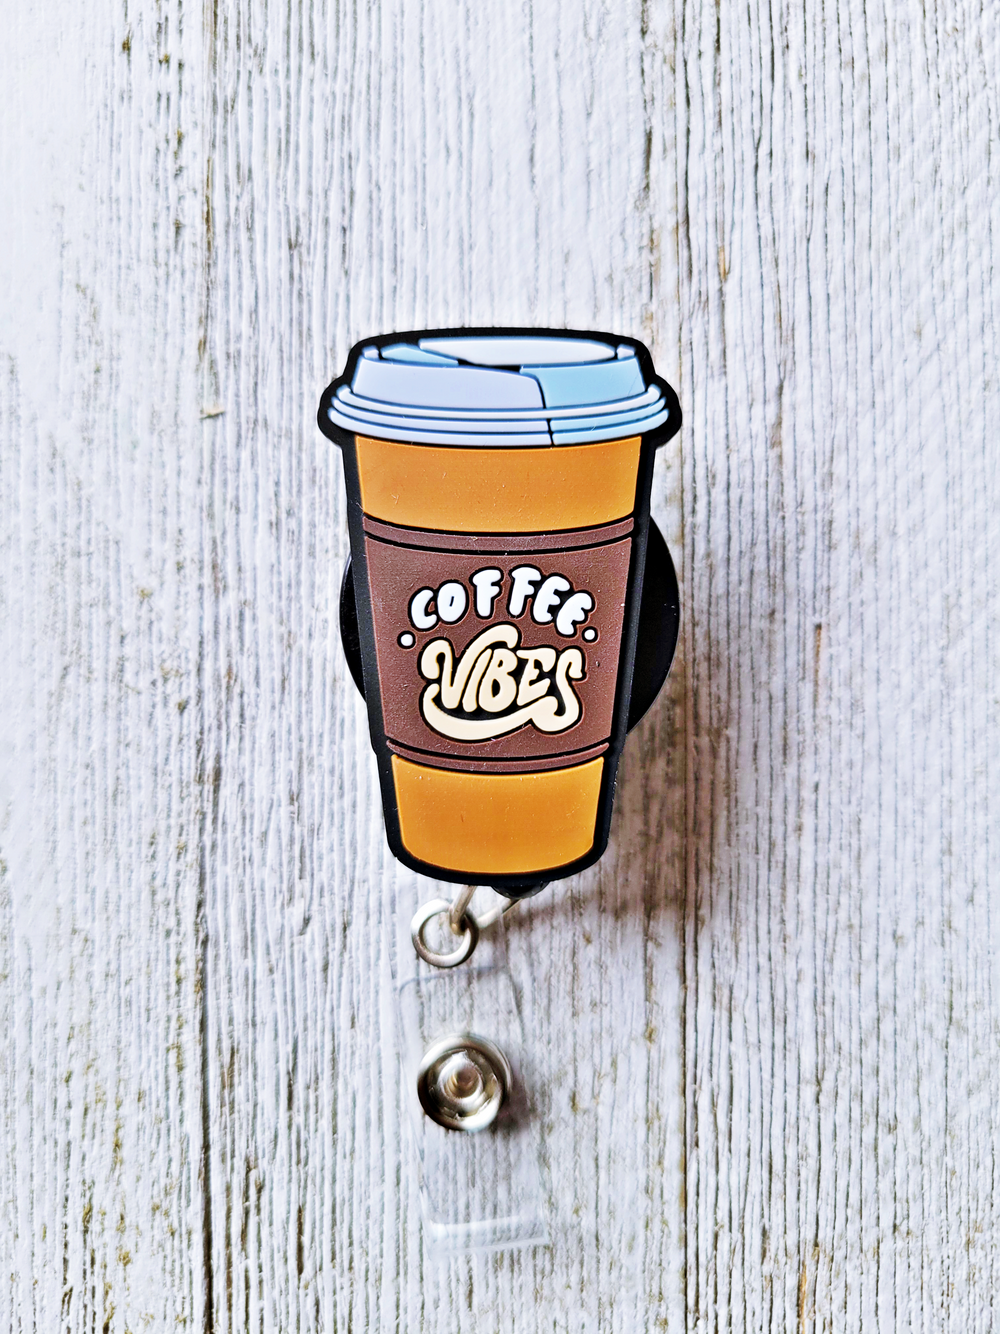 Double Up Coffee Vibes Badge Reels